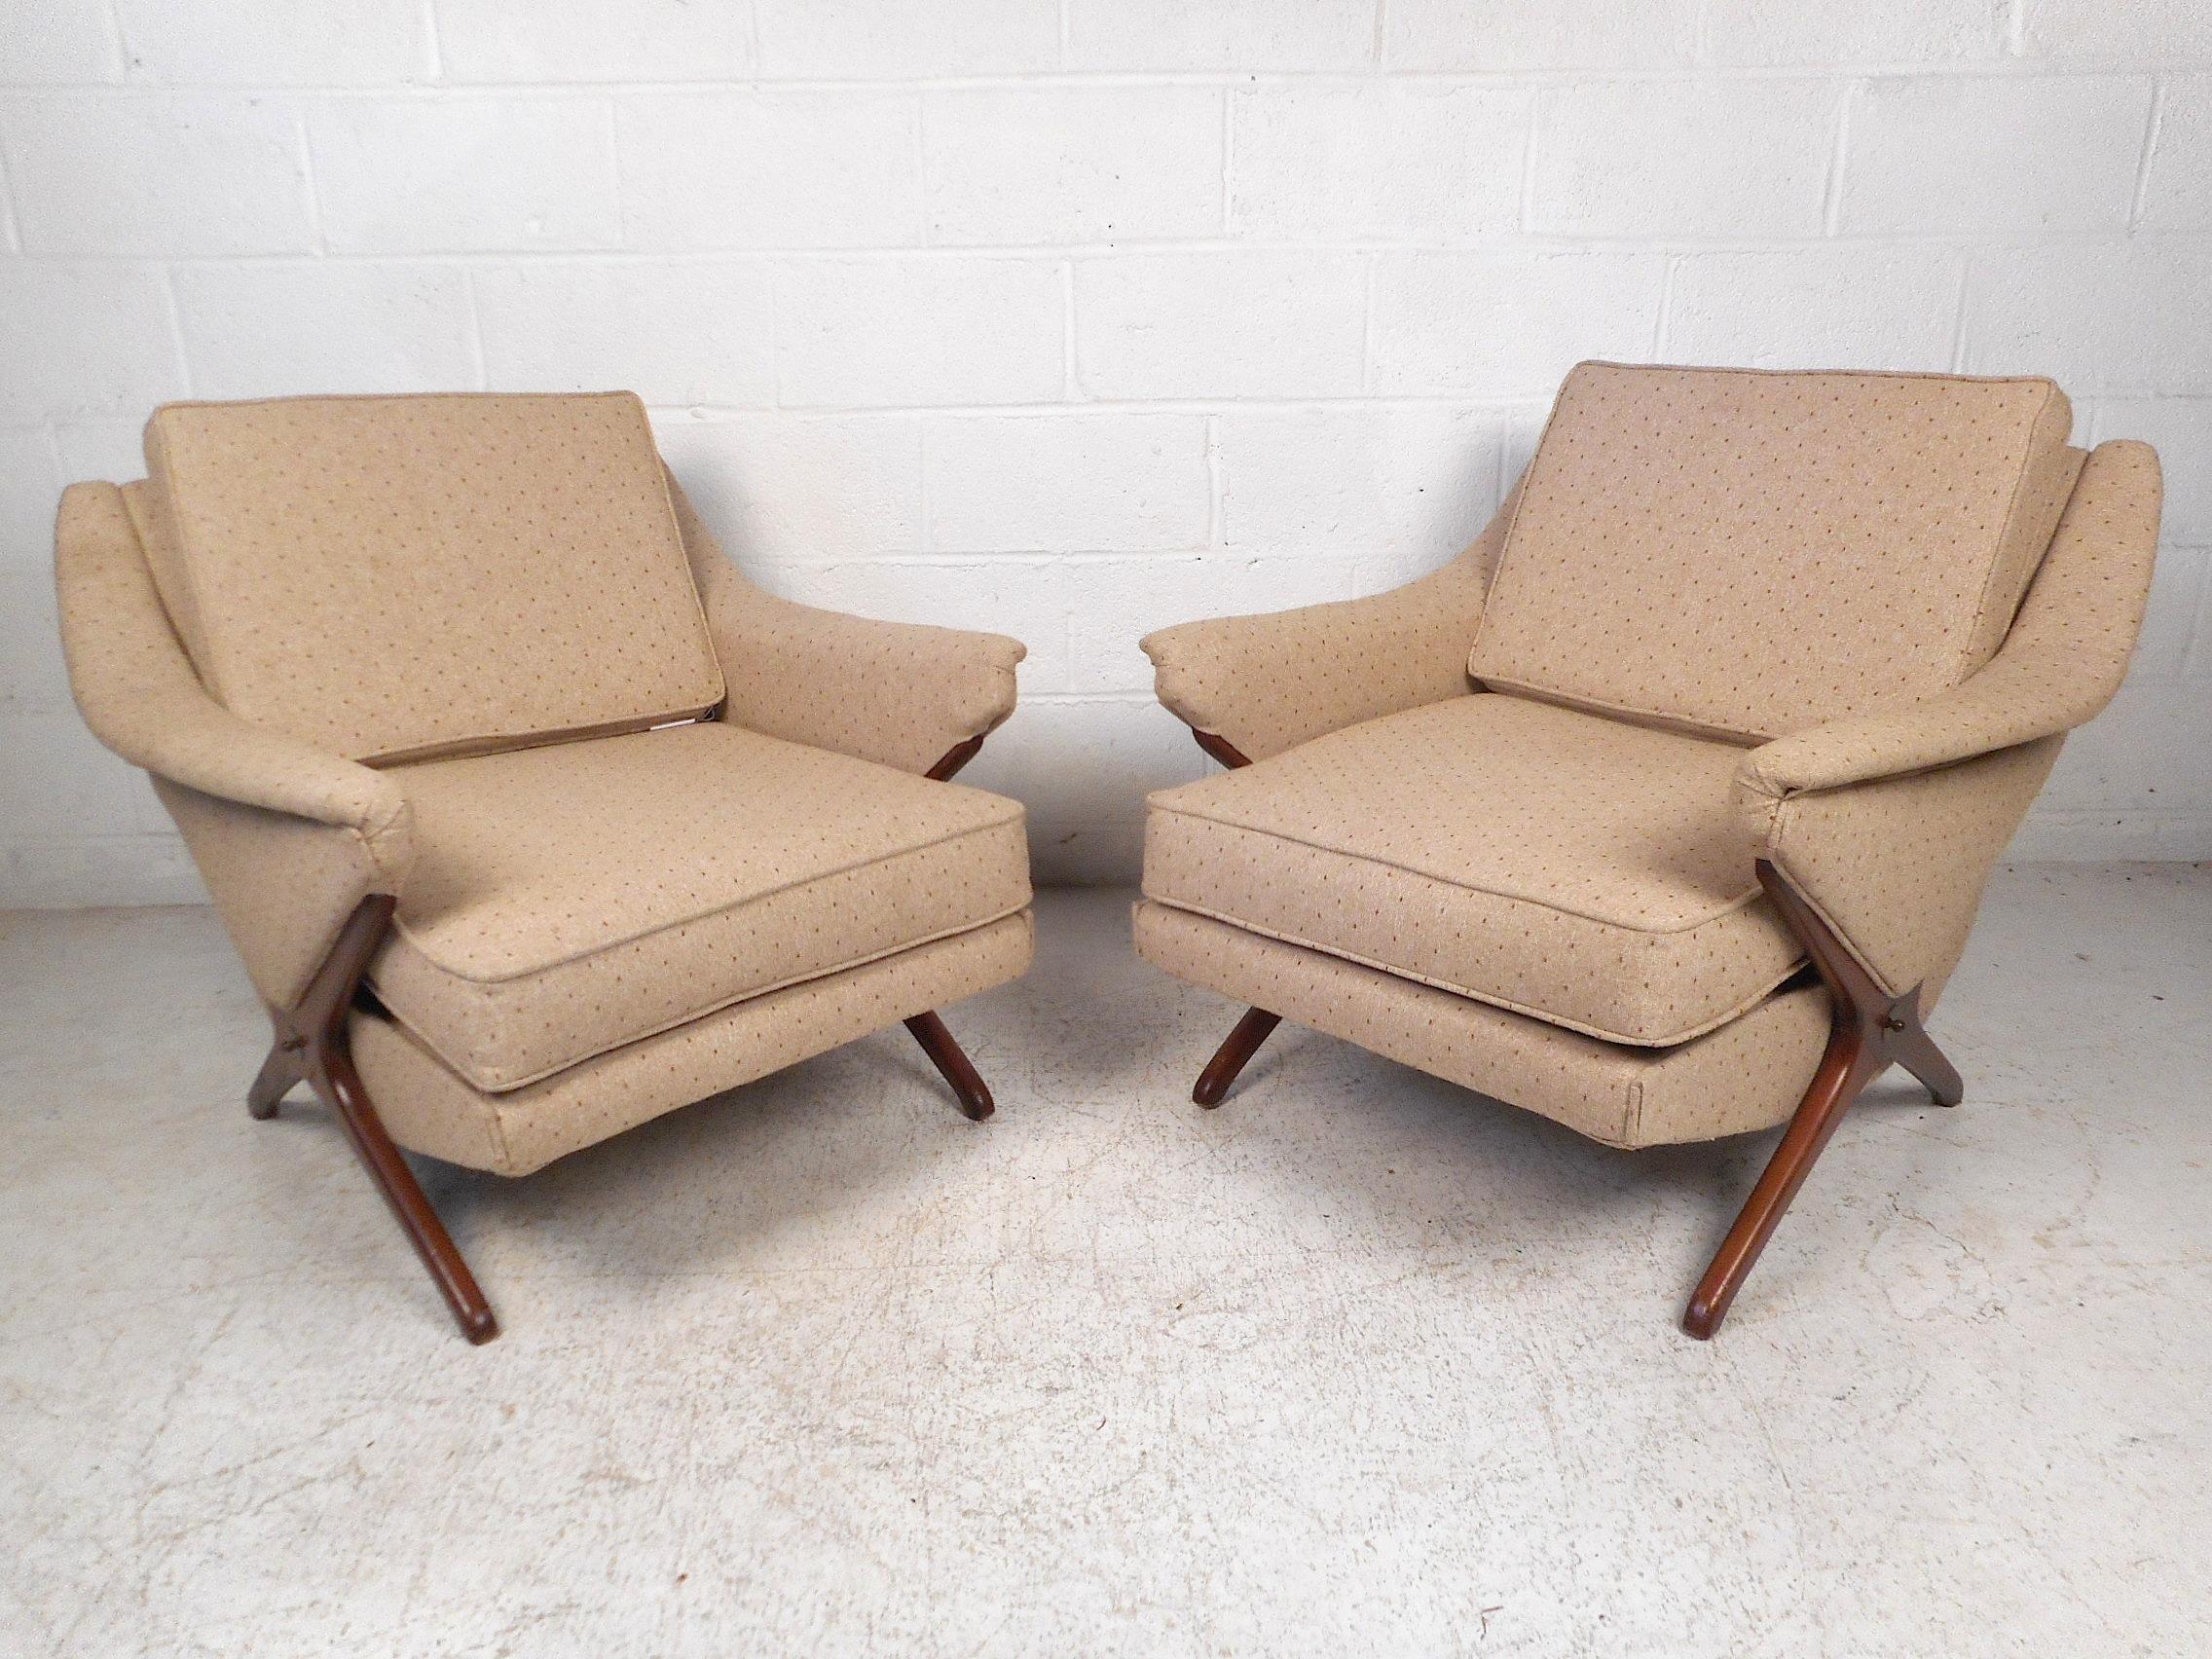 Stylish pair of lounge chairs. Sturdy sculpted walnut bases with decorative brass inserts, spacious seating area with comfortable cushioning covered in a beige textured upholstery. An impressive addition to any home, business, or office's modern